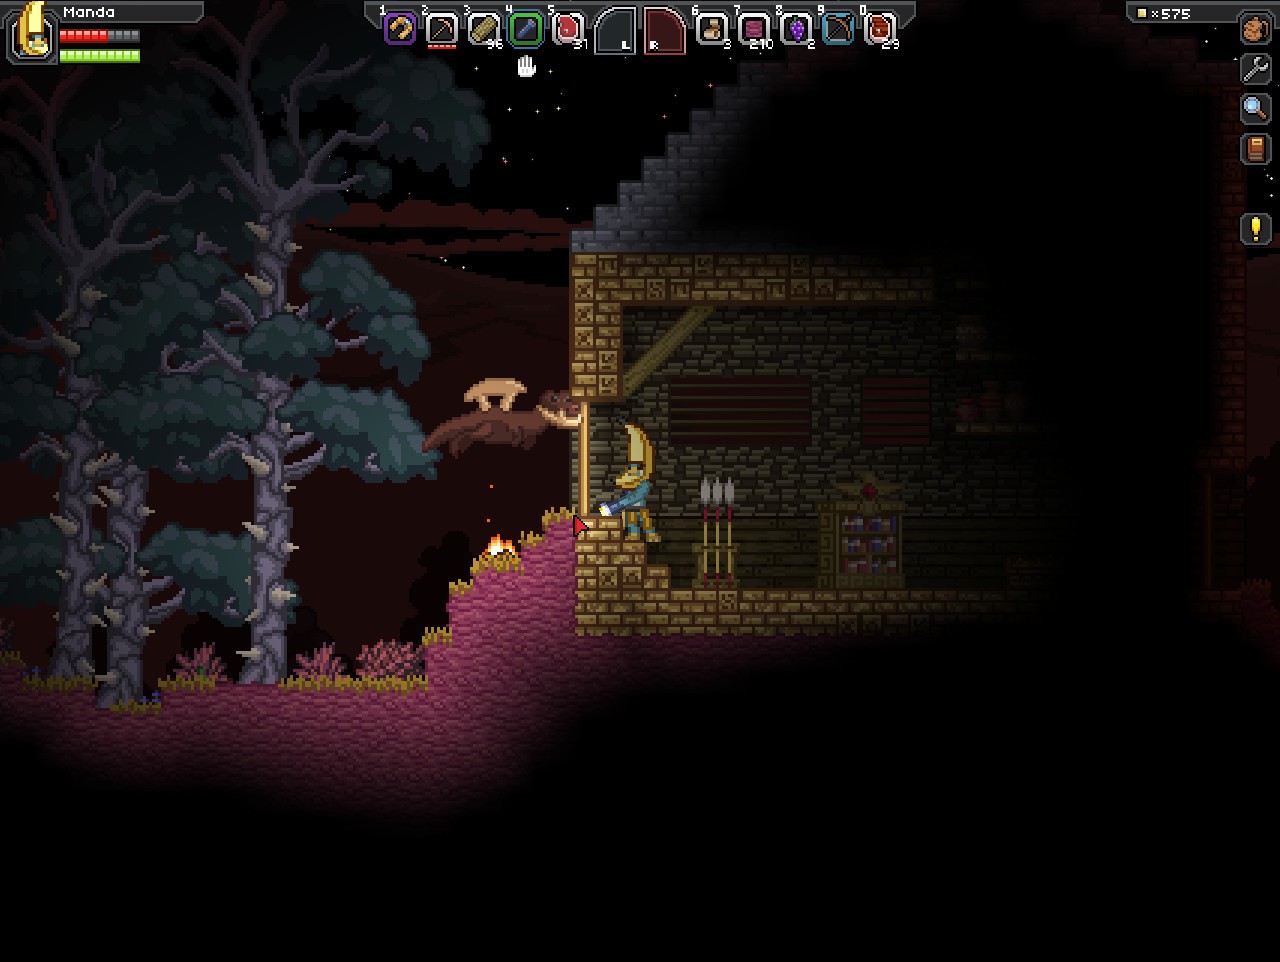 Starbound Images Early Access 2014 Screencaps Hd Wallpaper - Pc Game , HD Wallpaper & Backgrounds